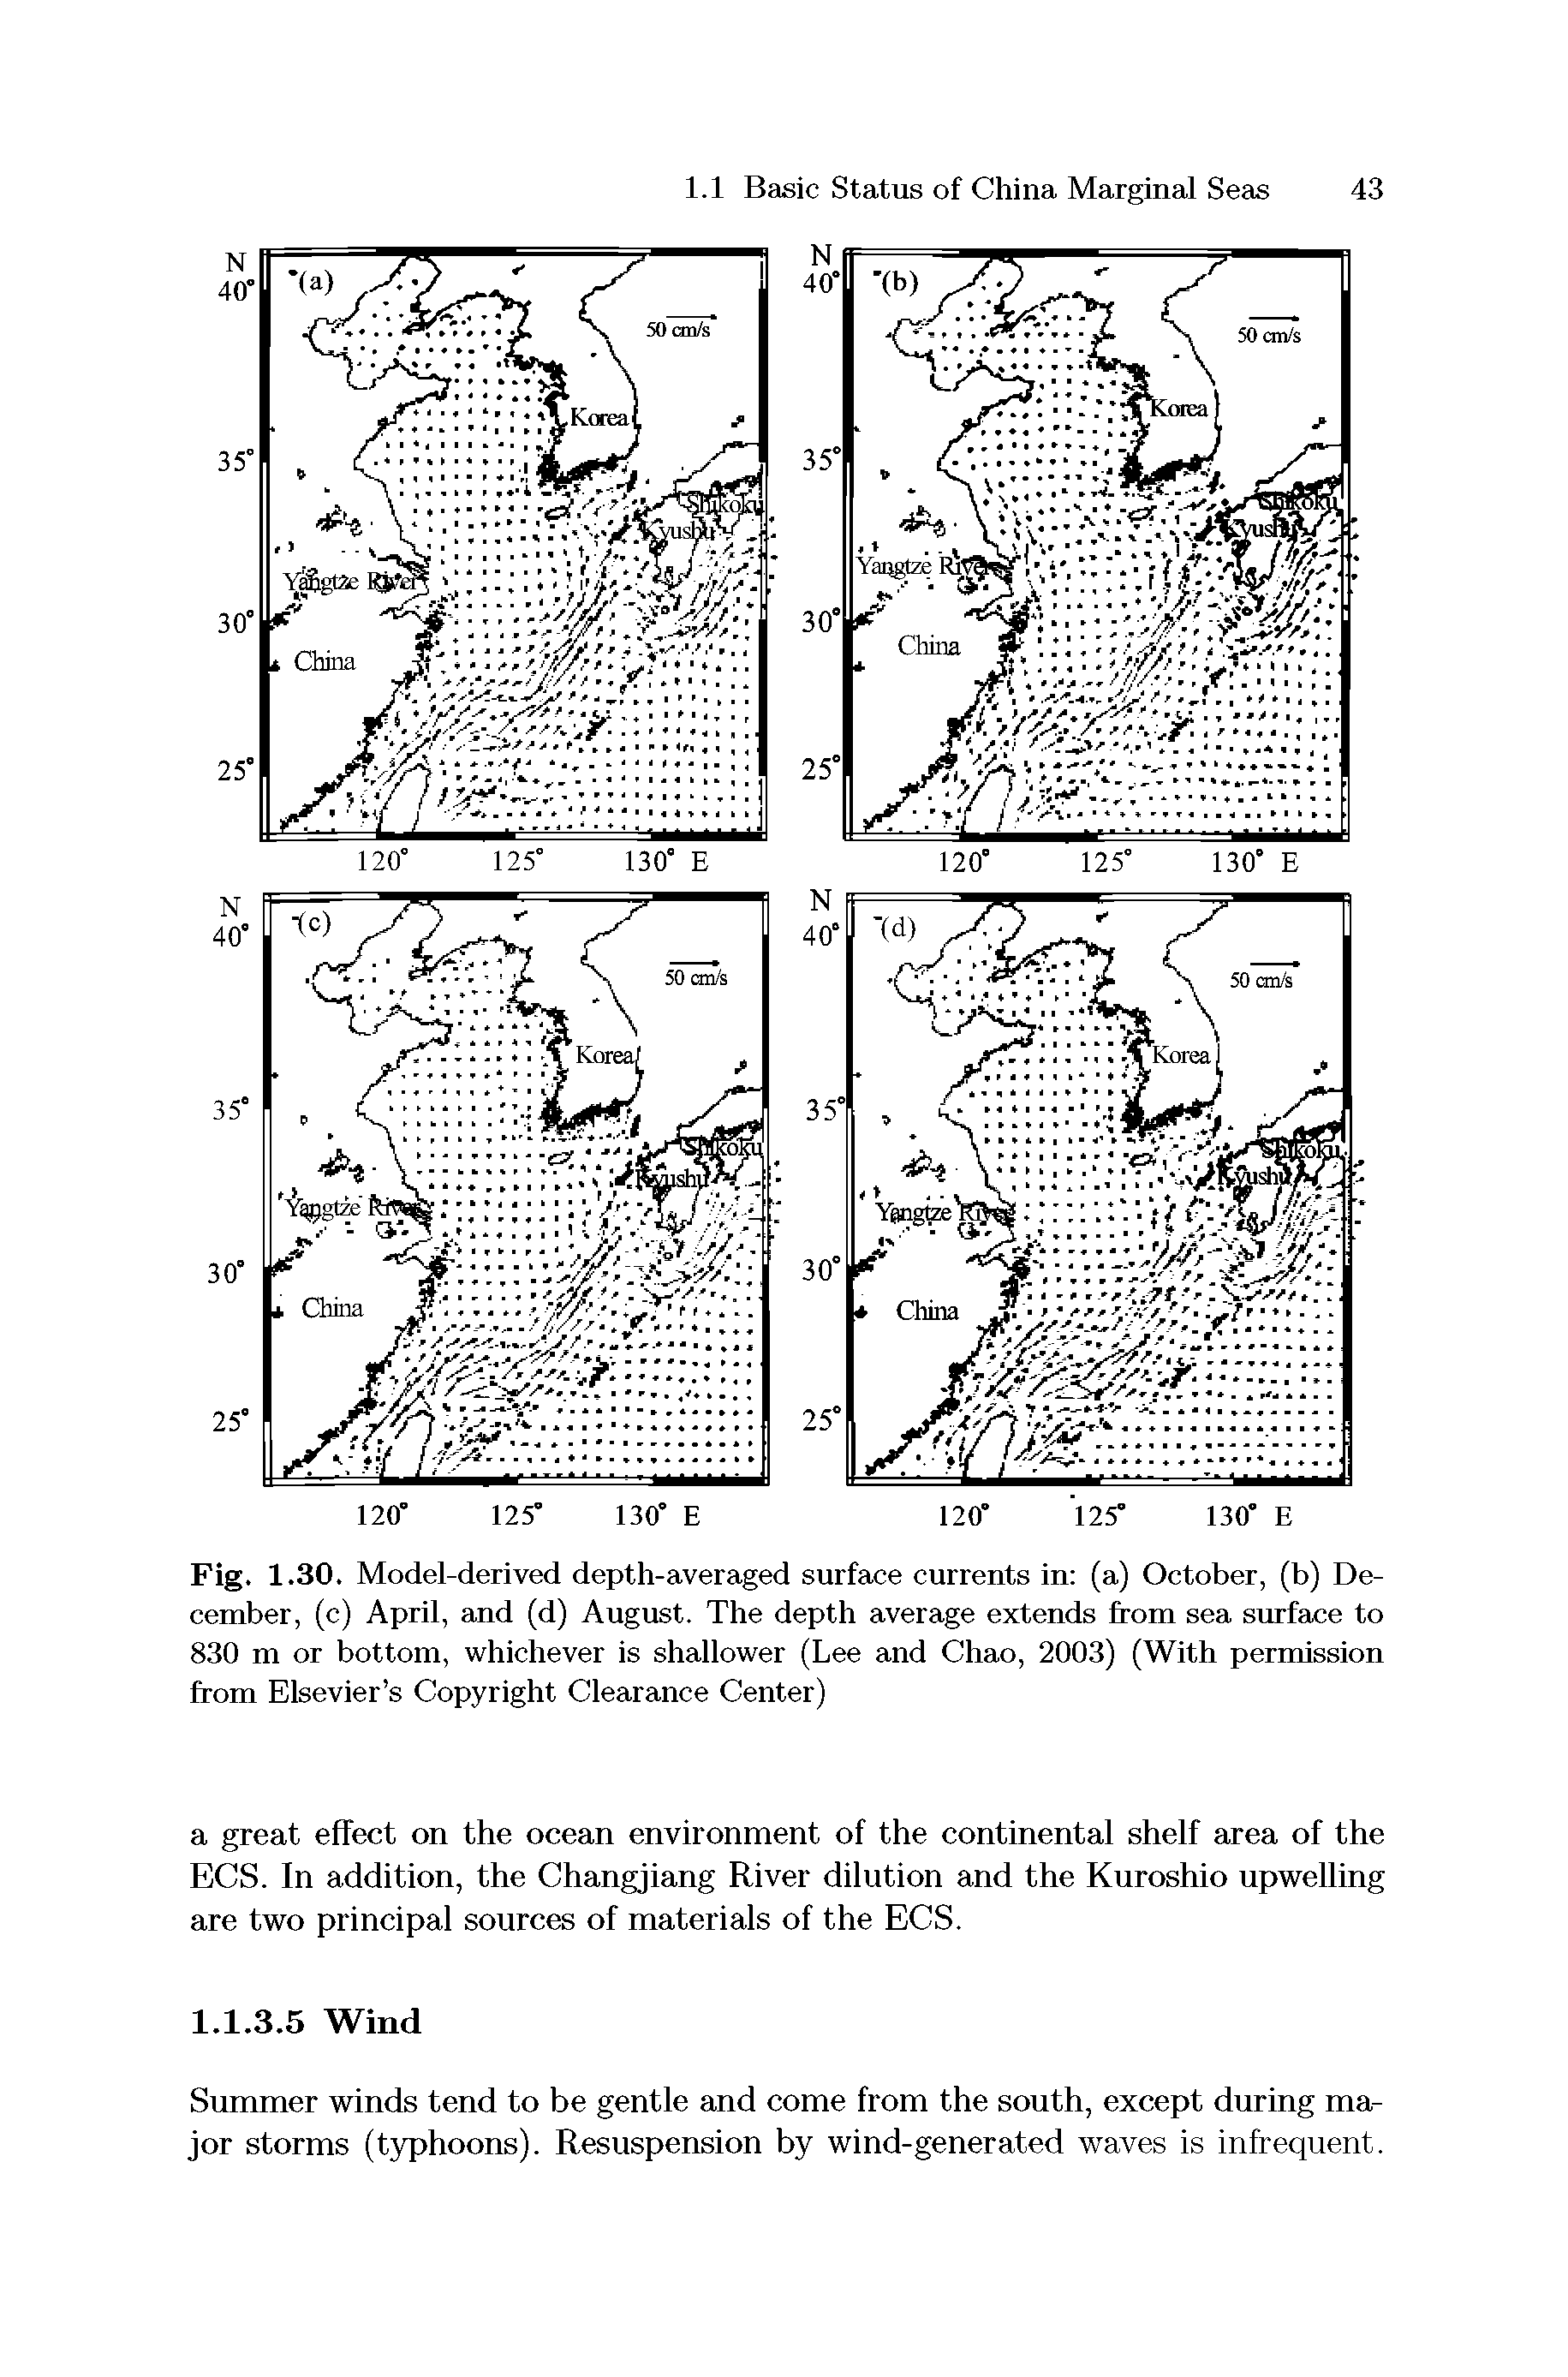 Fig. 1.30. Model-derived depth-averaged surface currents in (a) October, (b) December, (c) April, and (d) August. The depth average extends from sea surface to 830 m or bottom, whichever is shallower (Lee and Chao, 2003) (With permission from Elsevier s Copyright Clearance Center)...